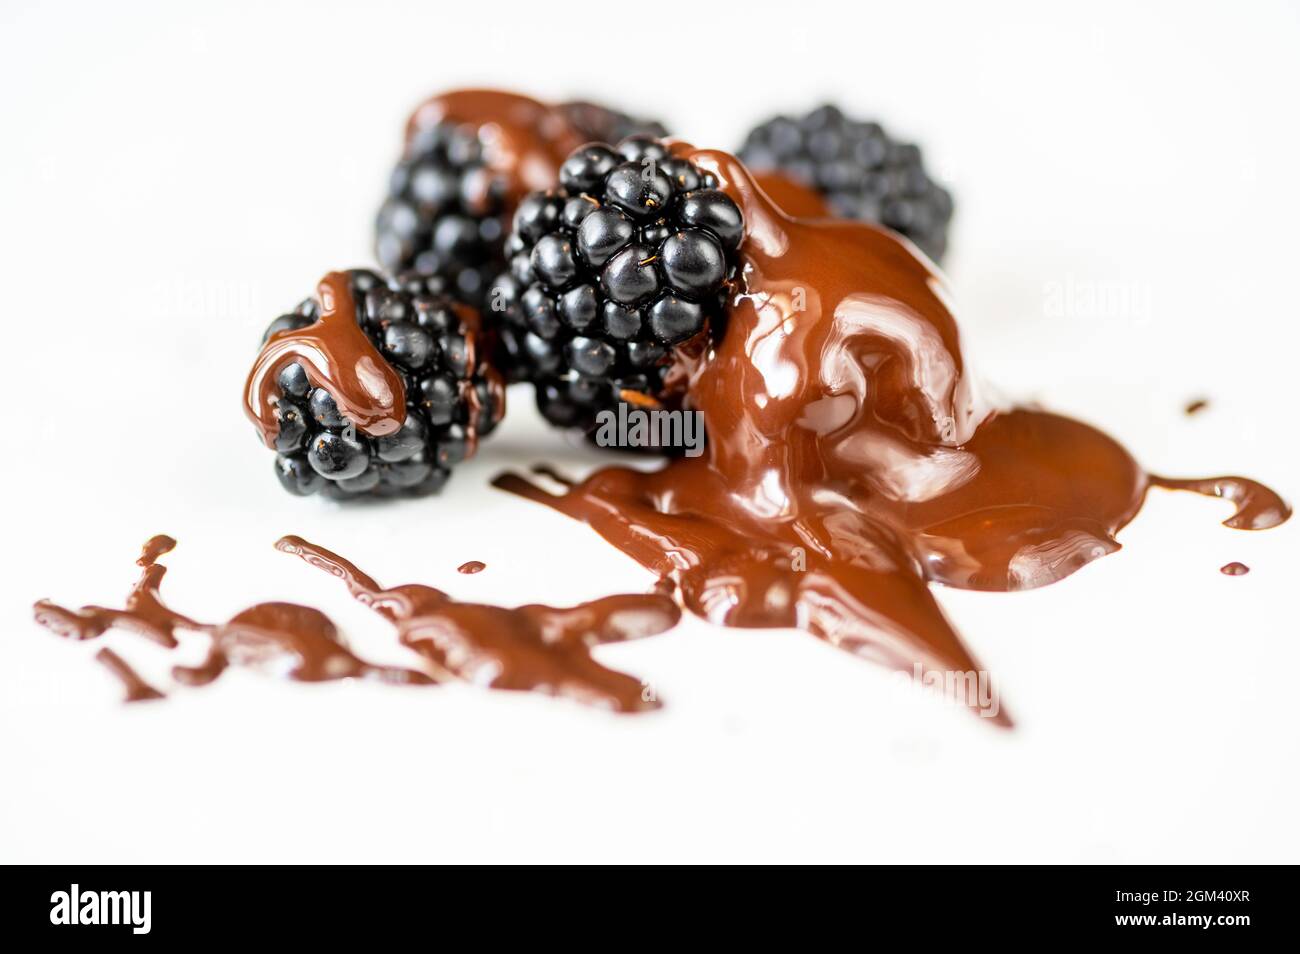 Blackberry with dissolved chocolate on white background, closeup. Stock Photo